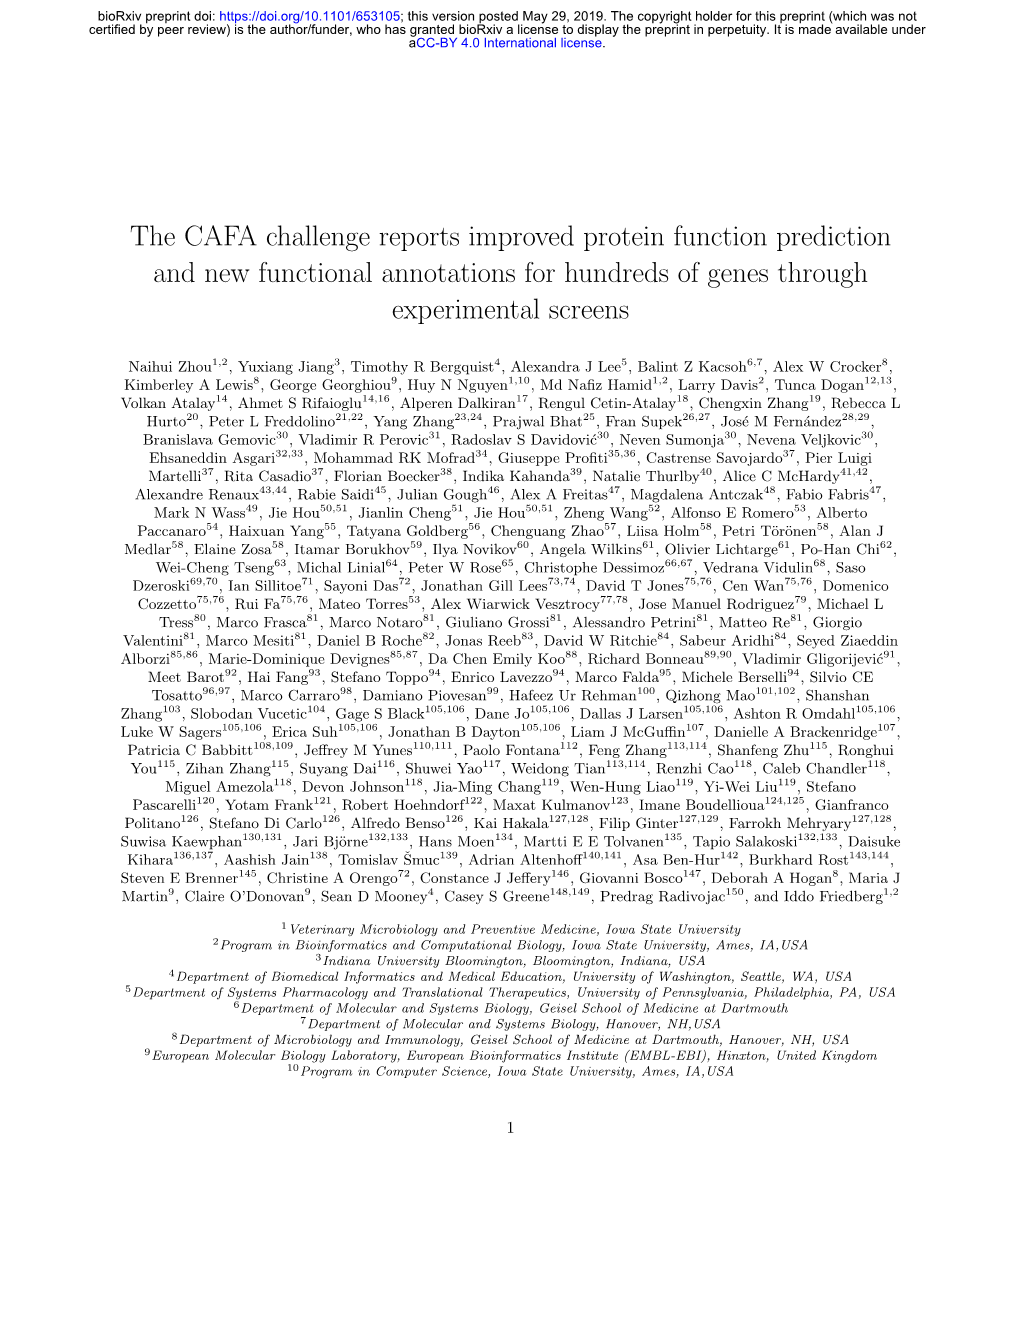 The CAFA Challenge Reports Improved Protein Function Prediction and New Functional Annotations for Hundreds of Genes Through Experimental Screens